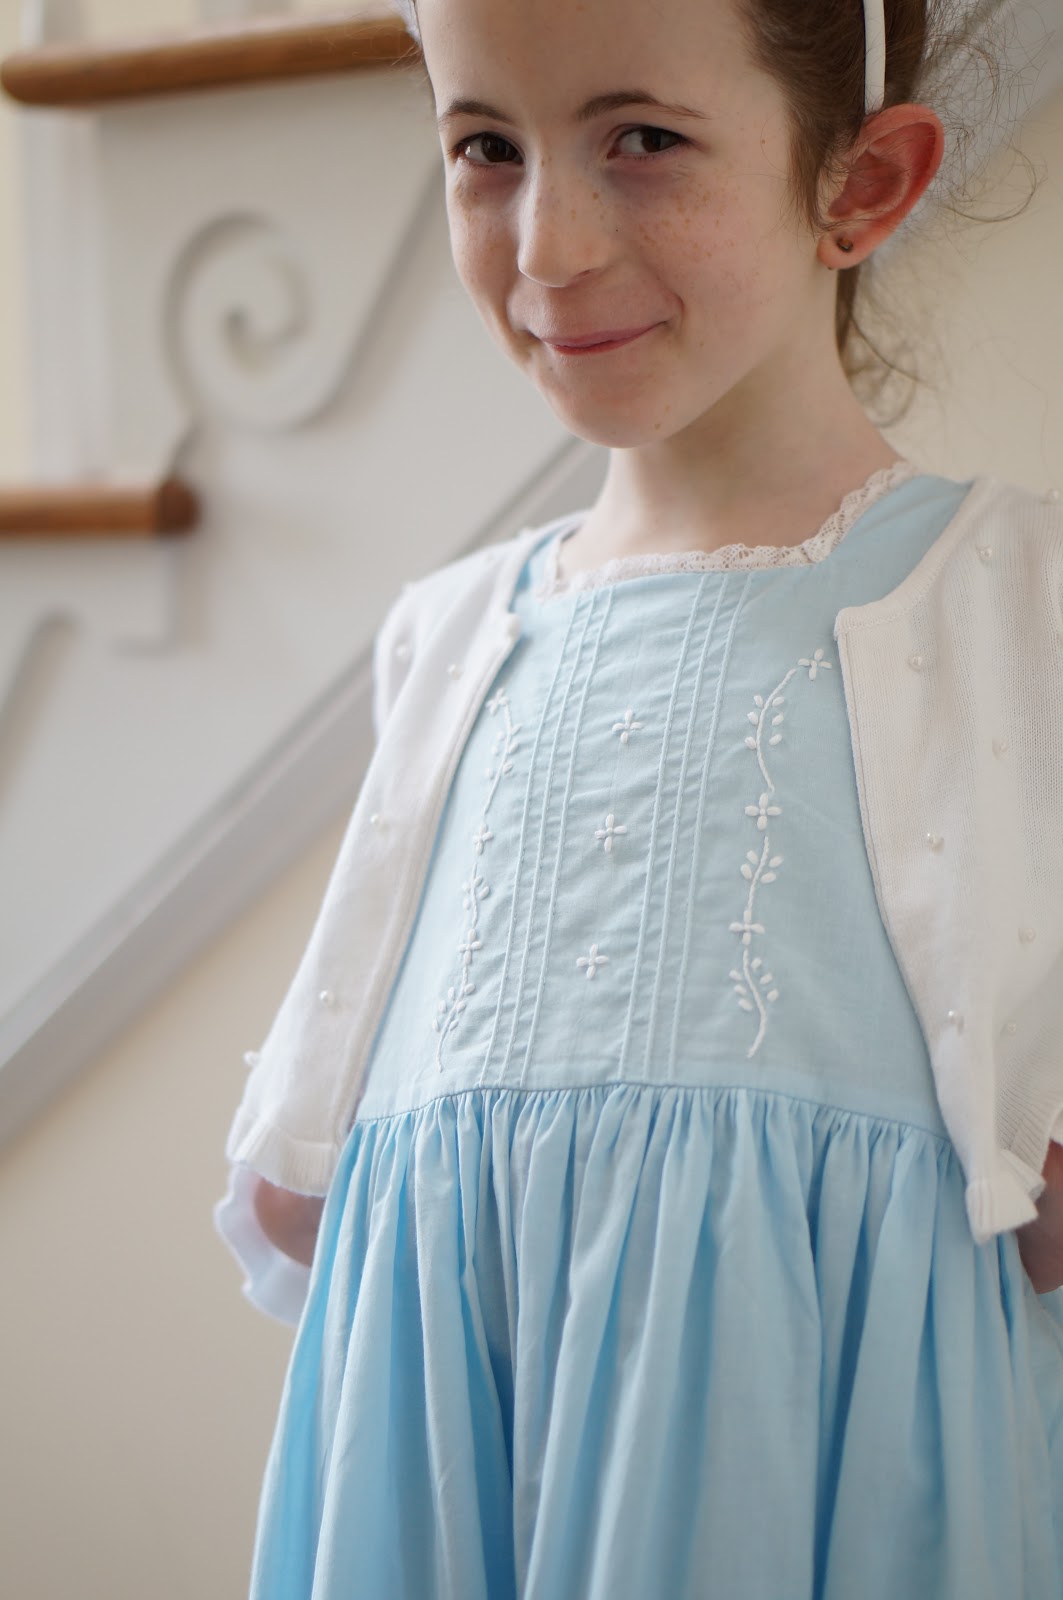 Popular North Carolina style blogger shares the Cape Cod dress from Strasburg Children. Read more here!